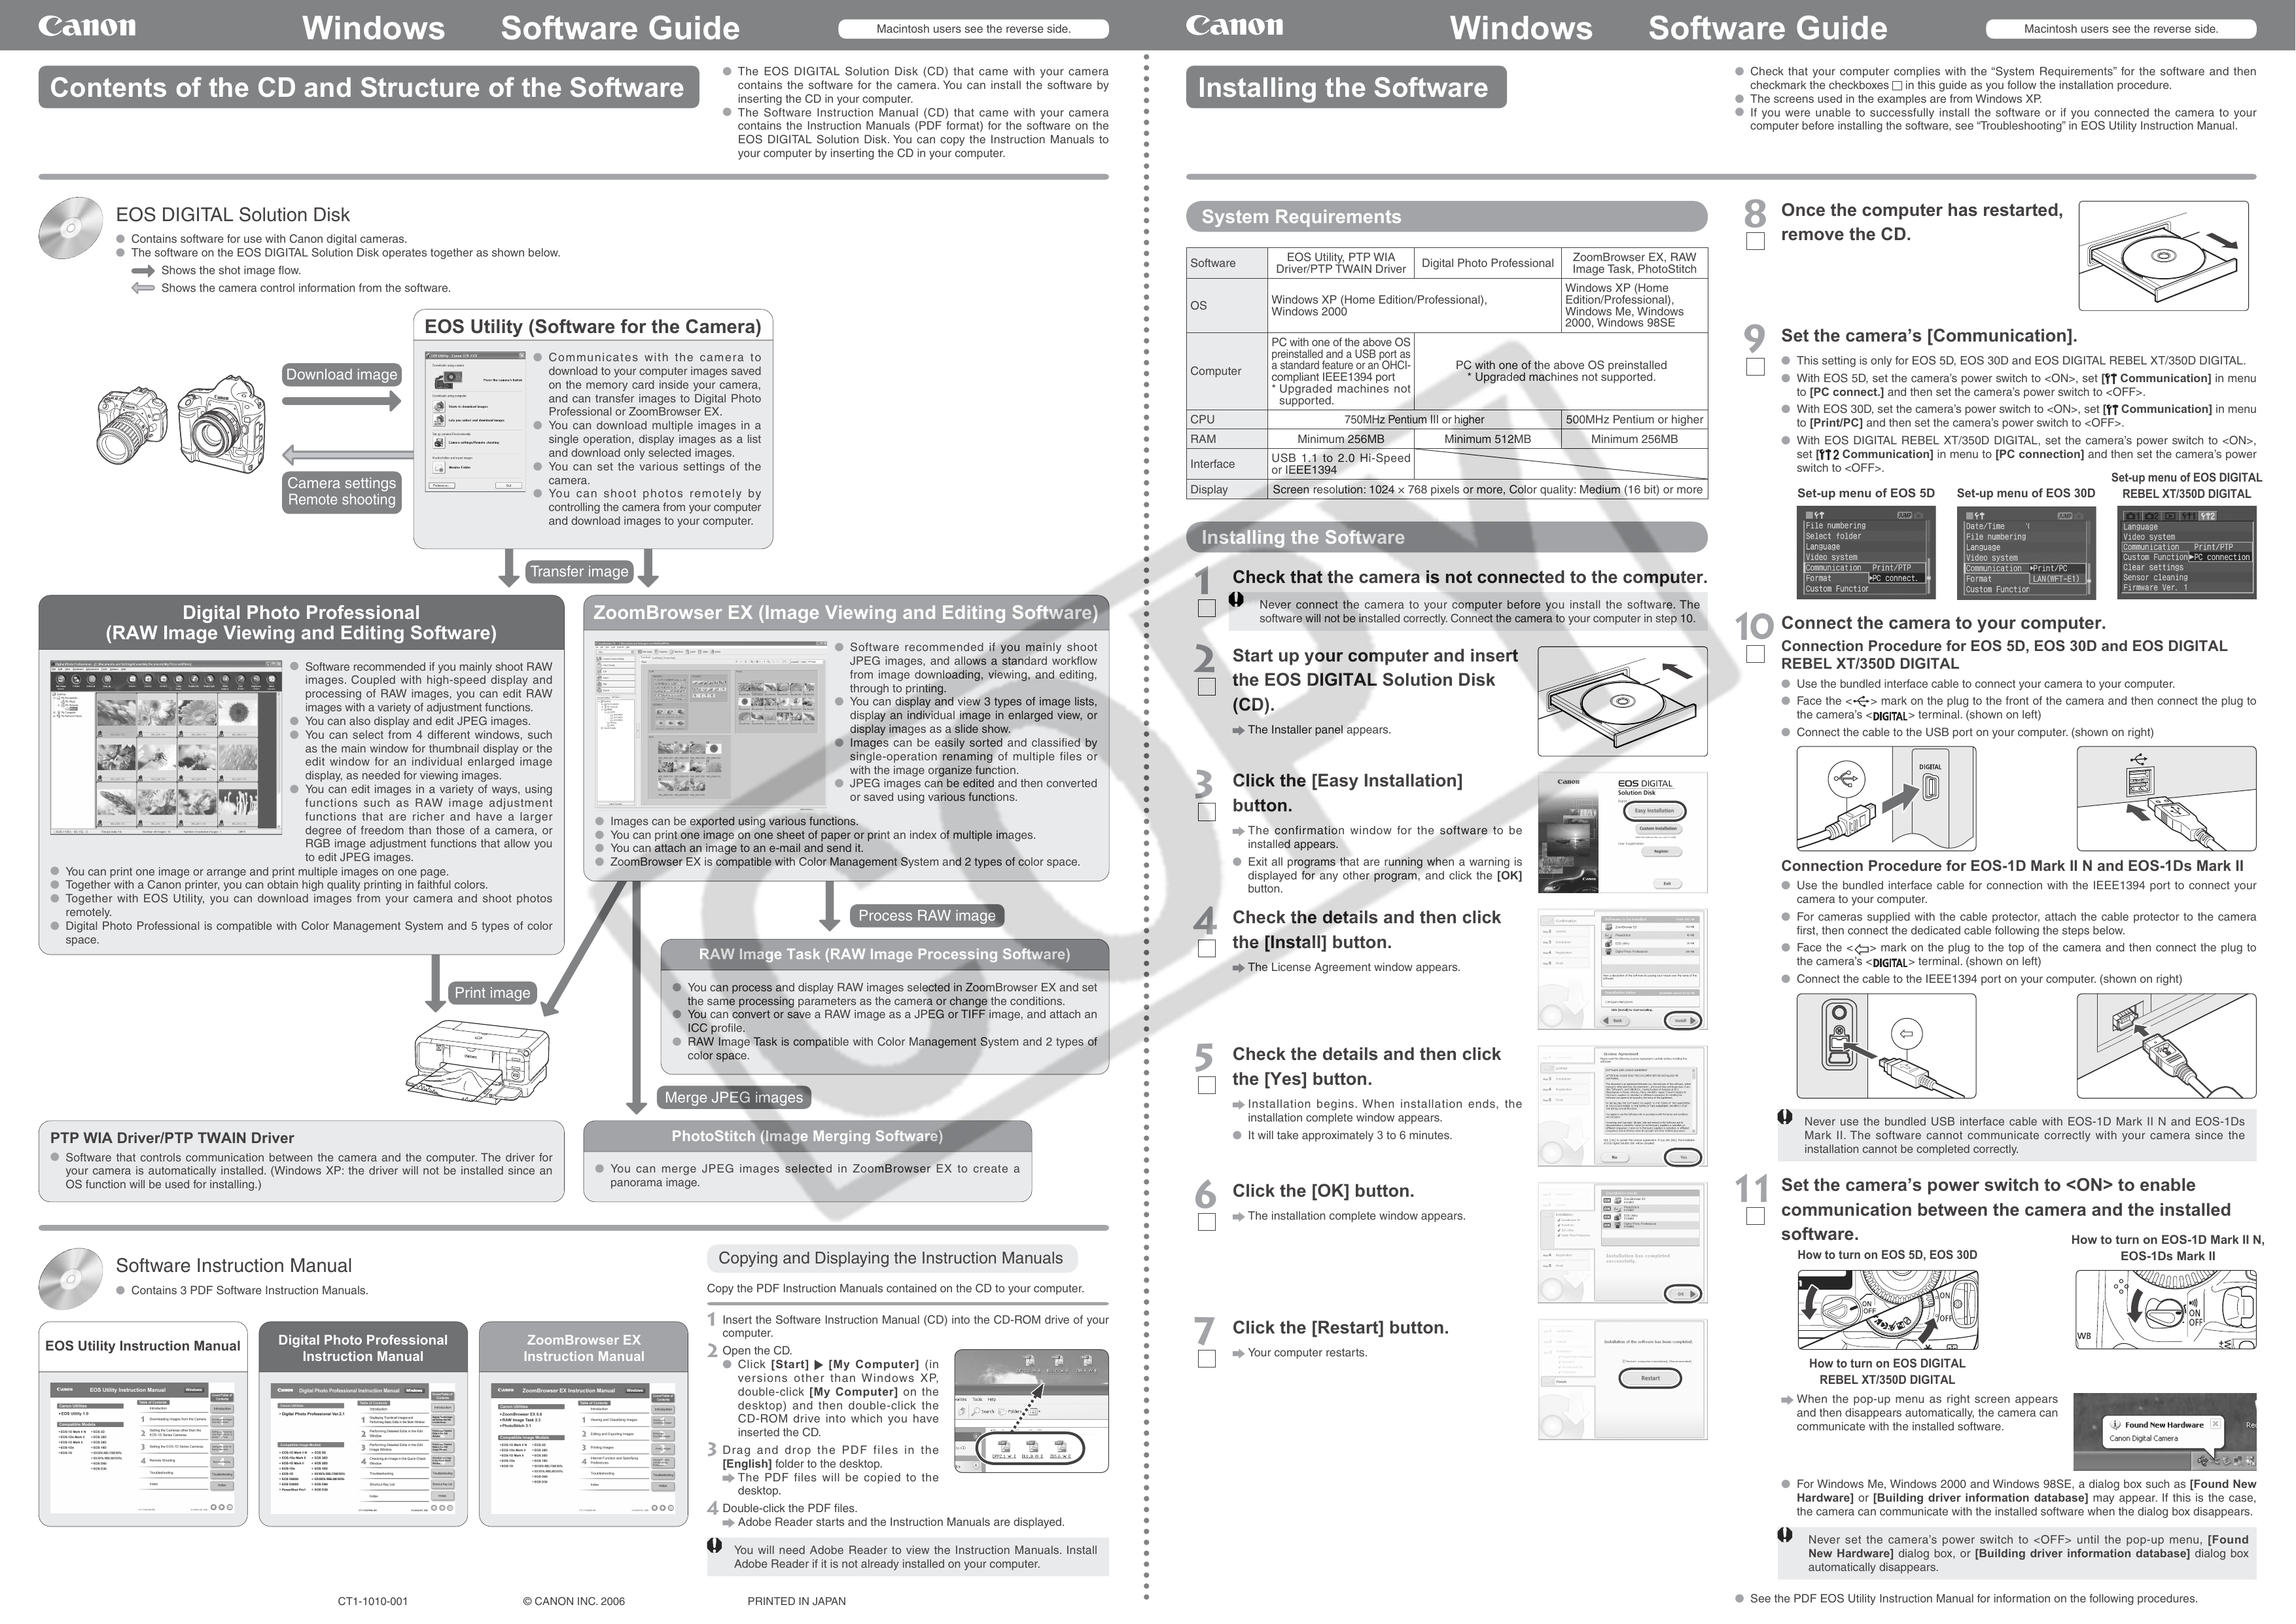 canon eos rebel xs manual instructions